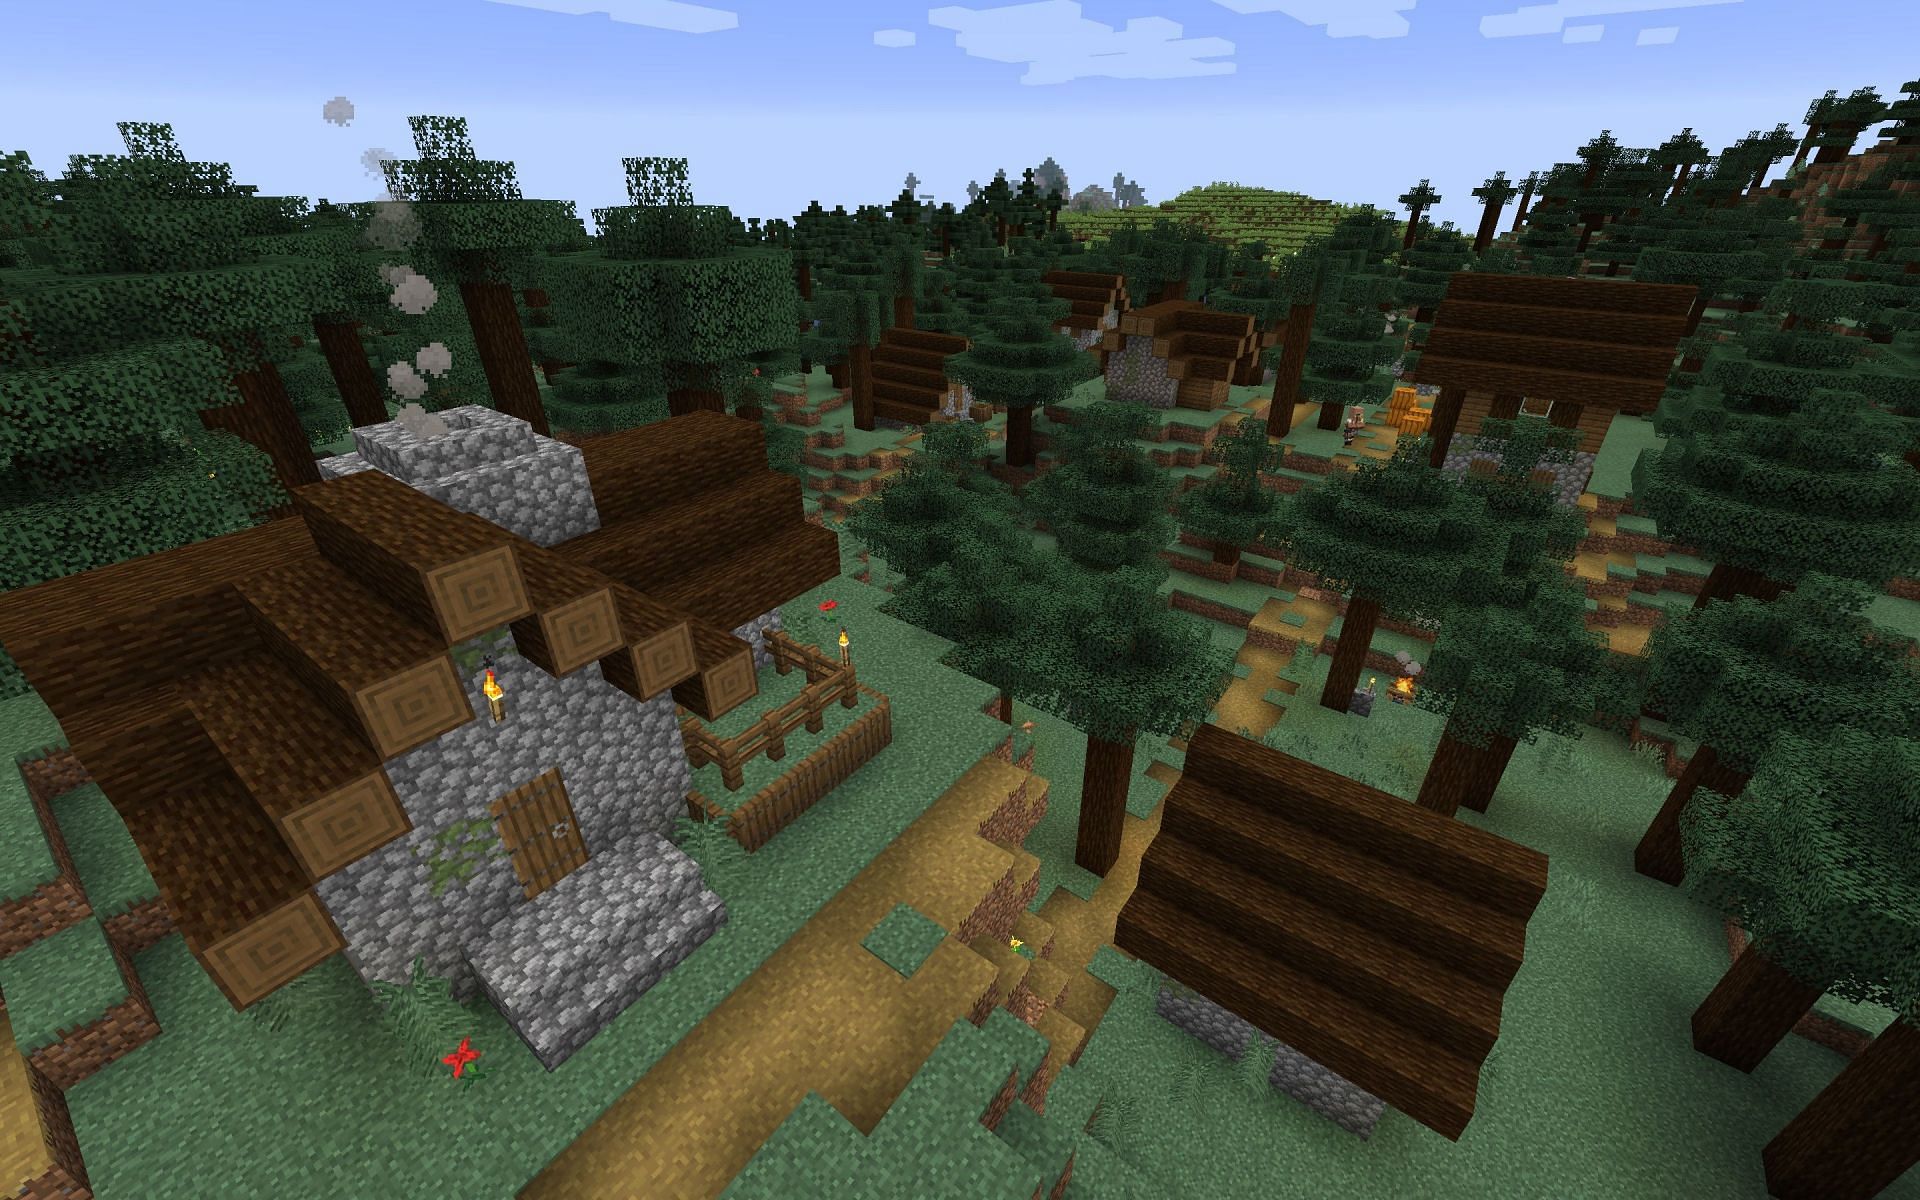 A taiga village nestled in a spruce forest (Image via Minecraft Seed HQ)